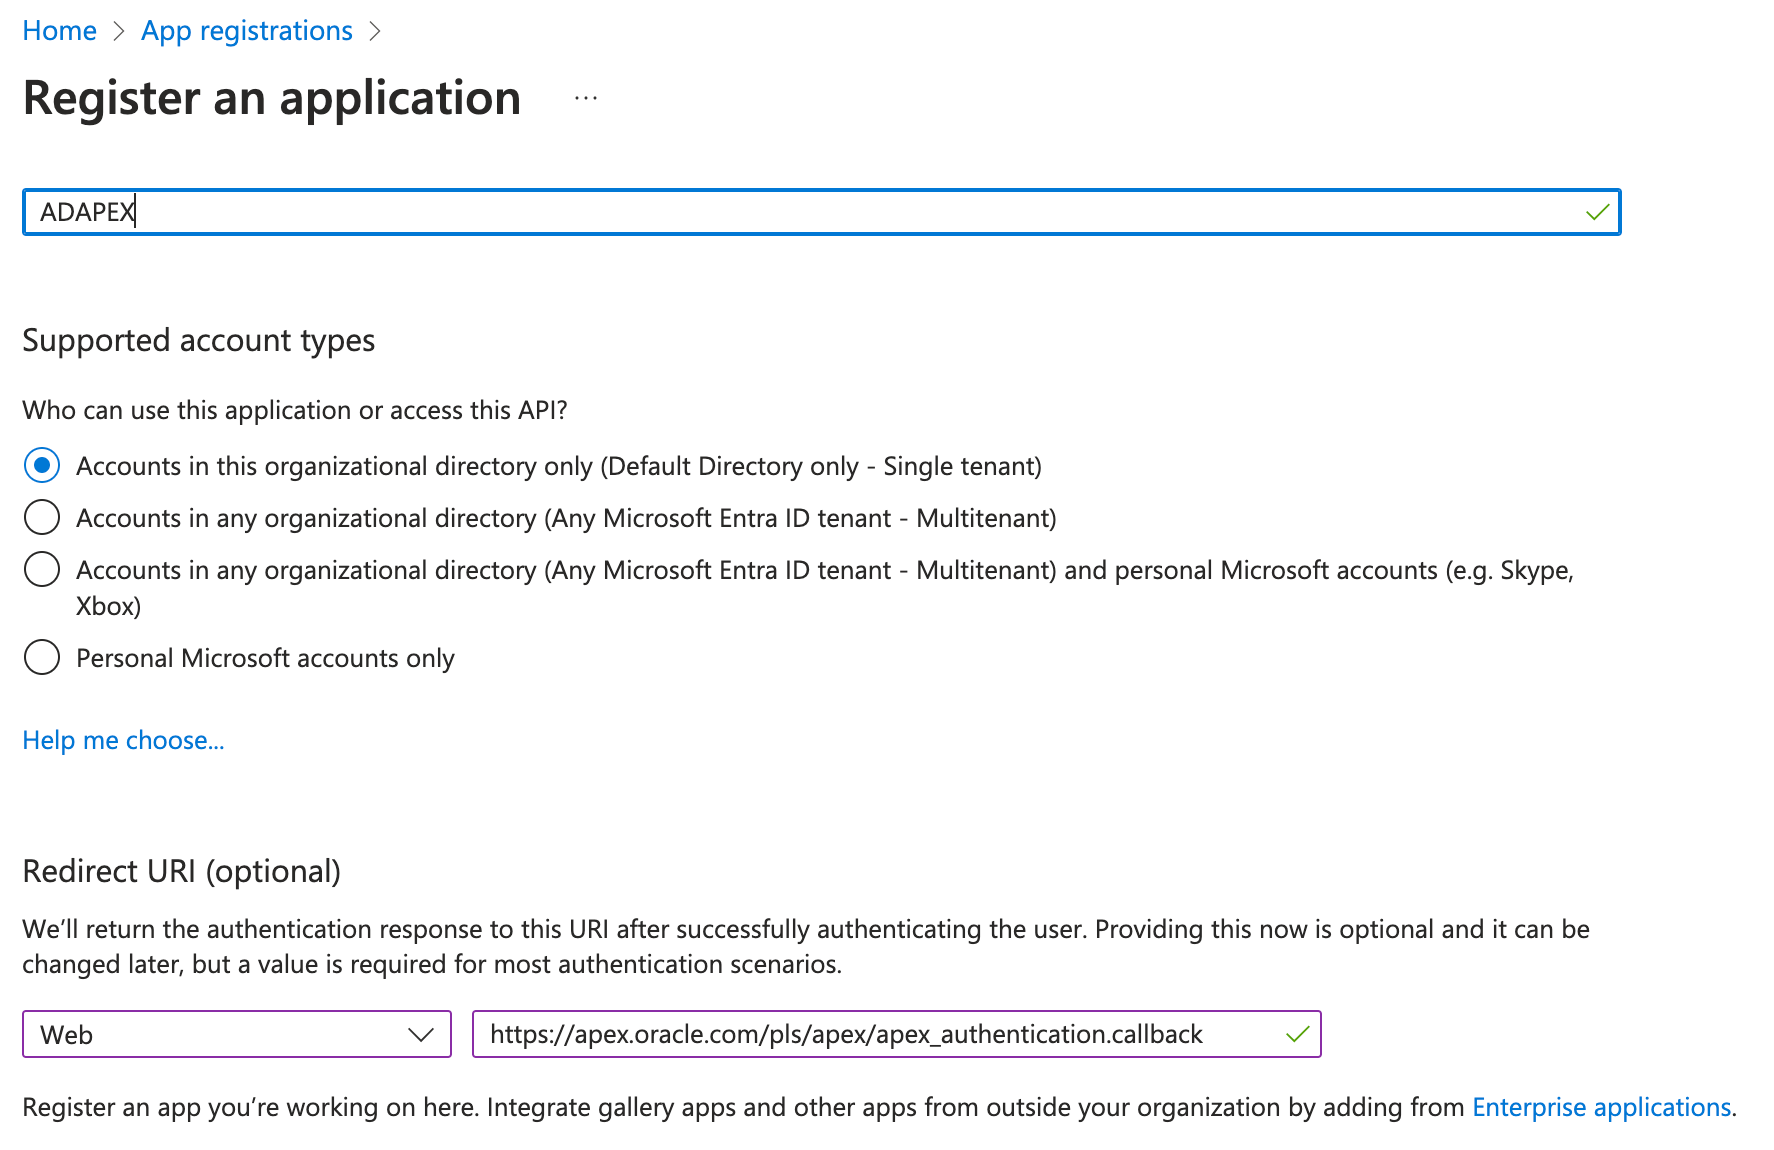 Screenshot of Microsoft Azure Console showing how to register an OAuth Application.